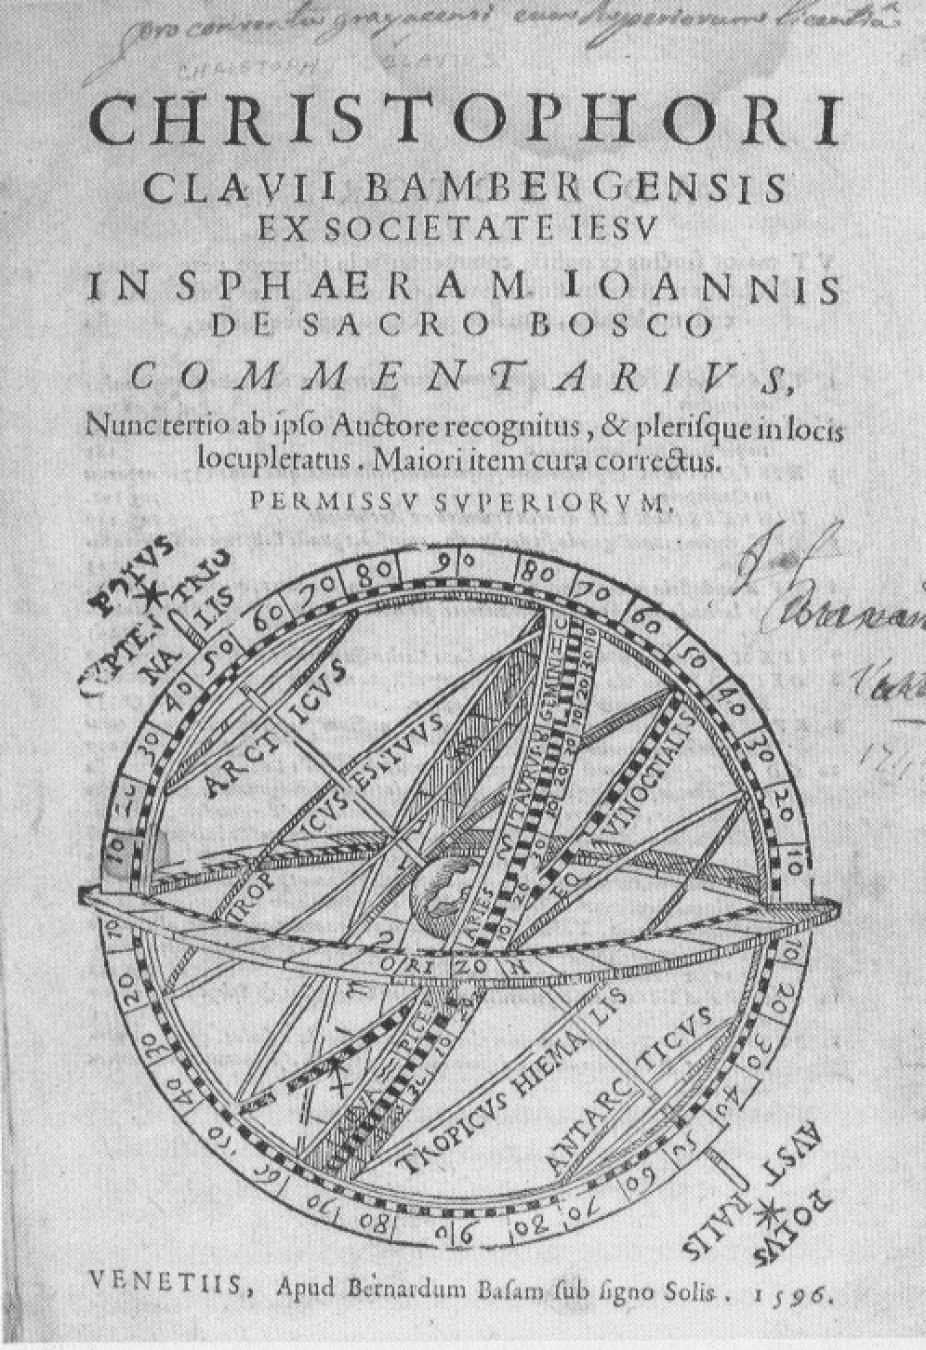 Title page of Clavius' commentary on the Spheres of Sacrobosco, first published in 1570